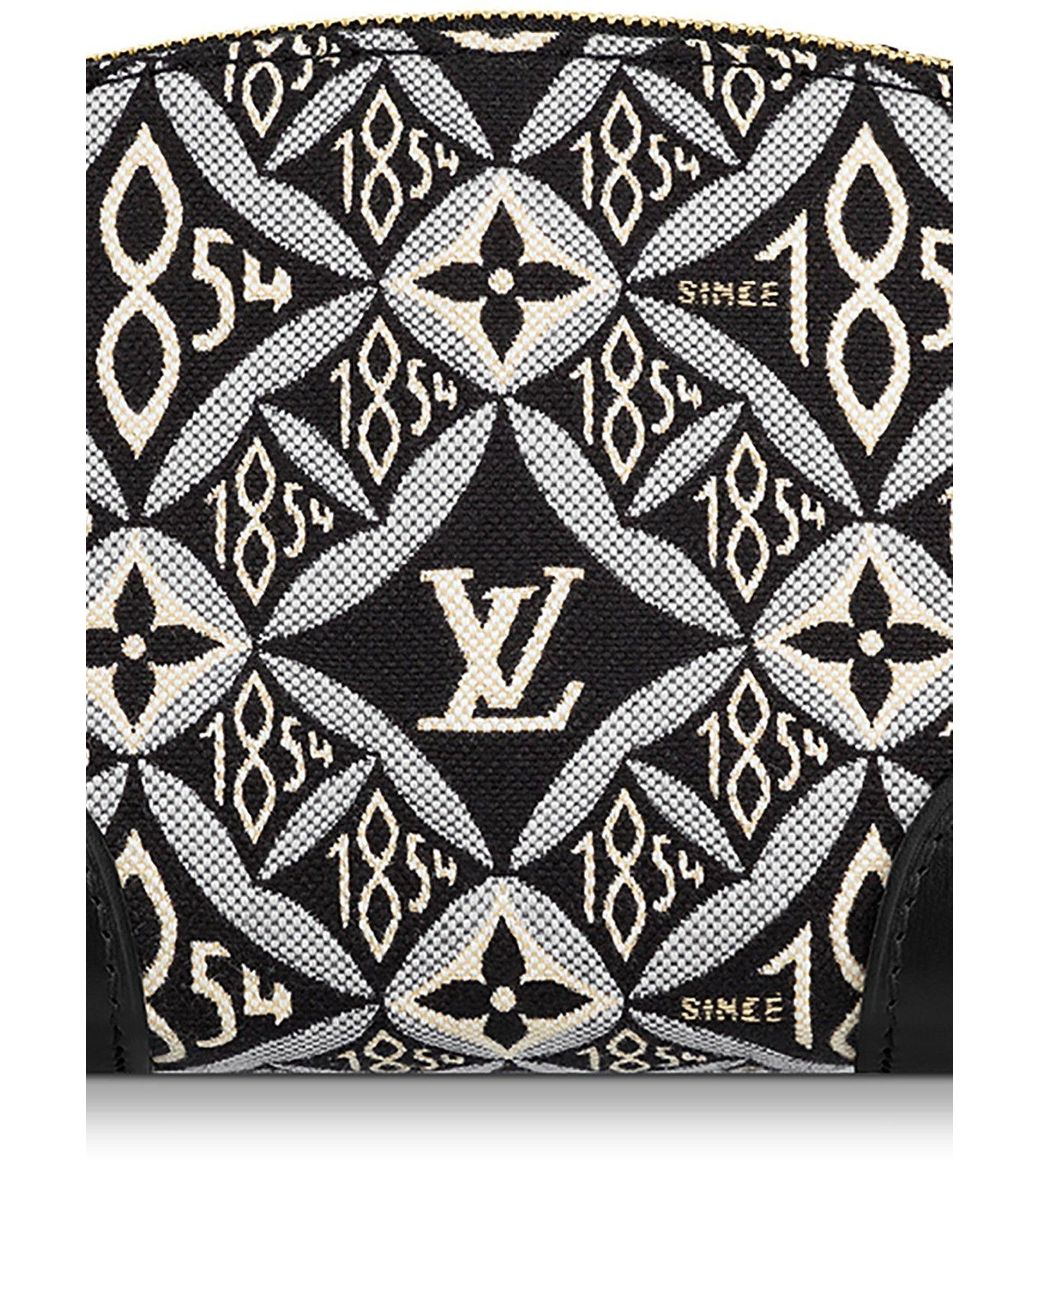 Louis Vuitton Store Photography Unframed Print  Fashion Wall Art   Photography Poster  TemproDesign